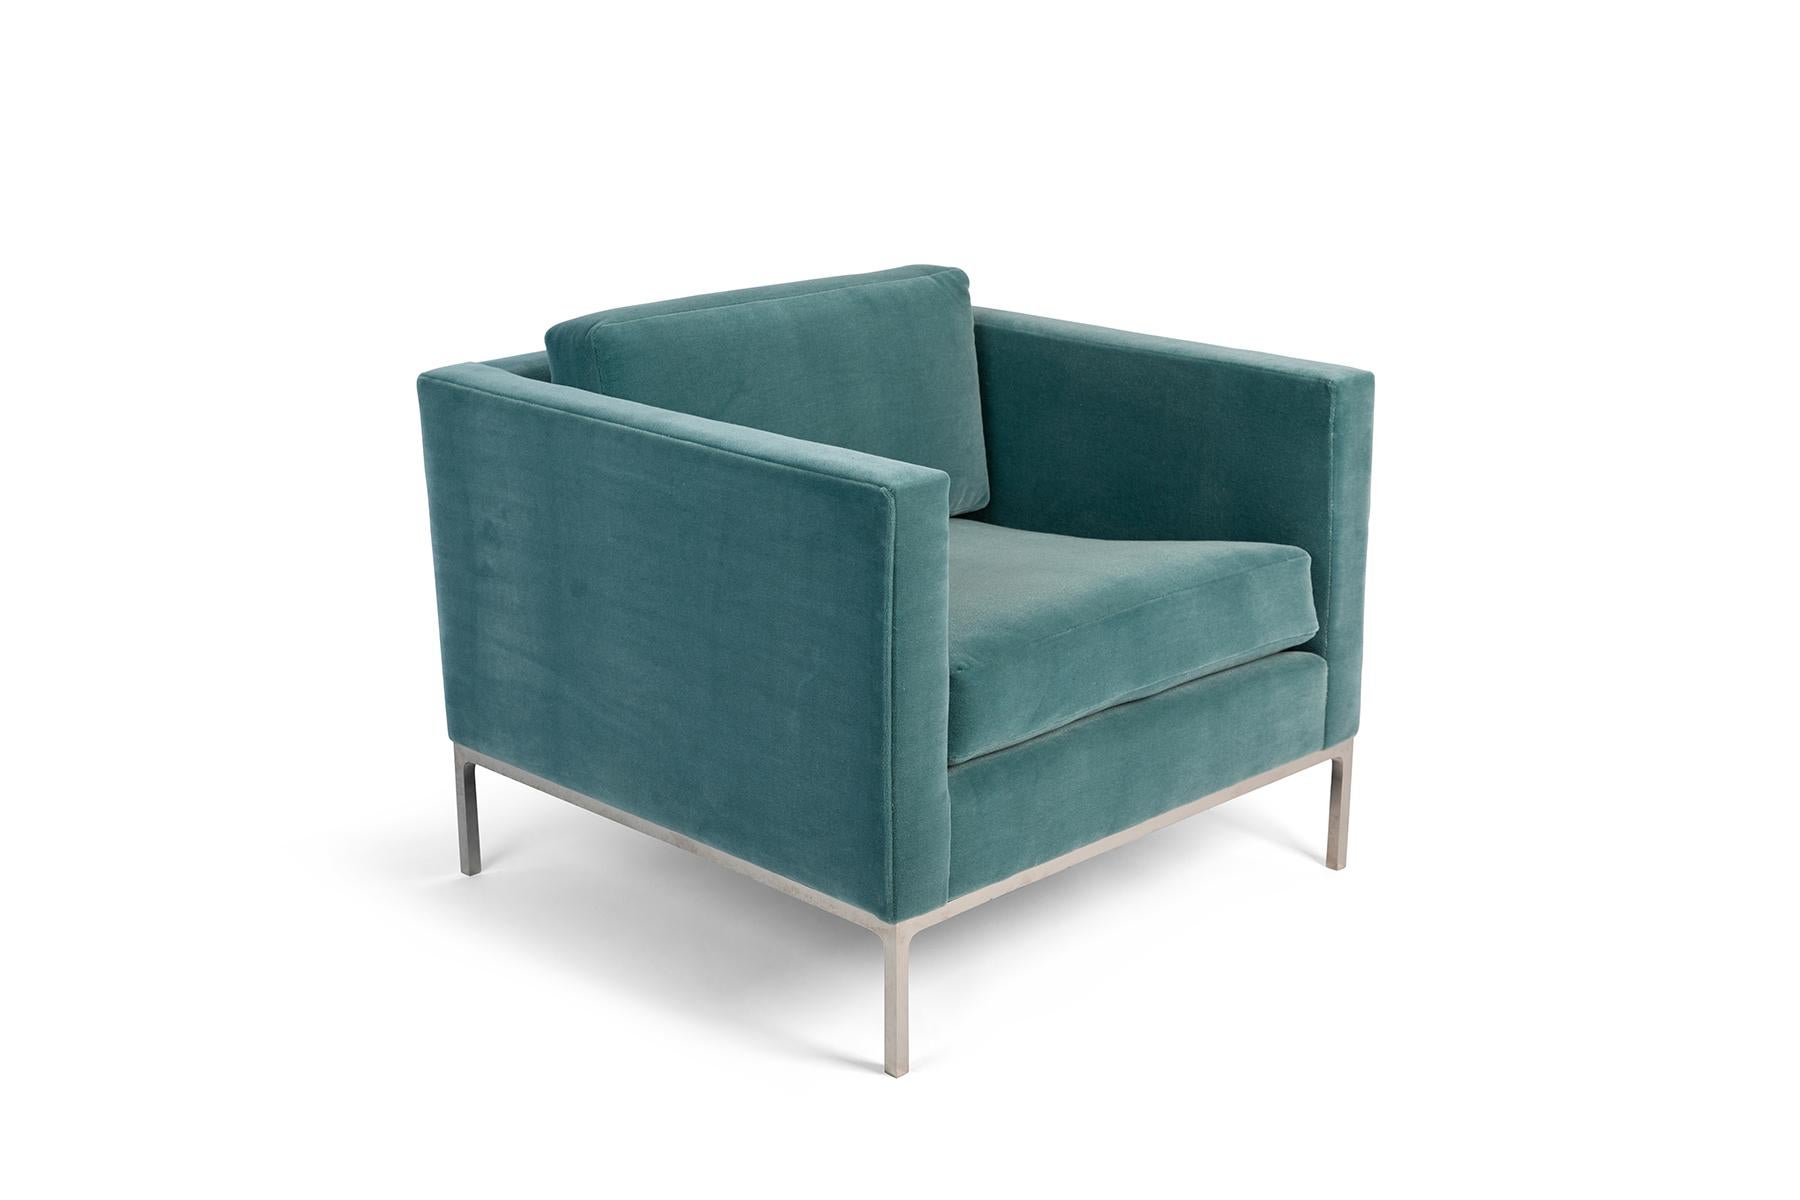 Pair of Nicos Zographos club chairs newly upholstered in an aquamarine sea foam colored mohair with polished chrome legs. Price listed is for the pair.